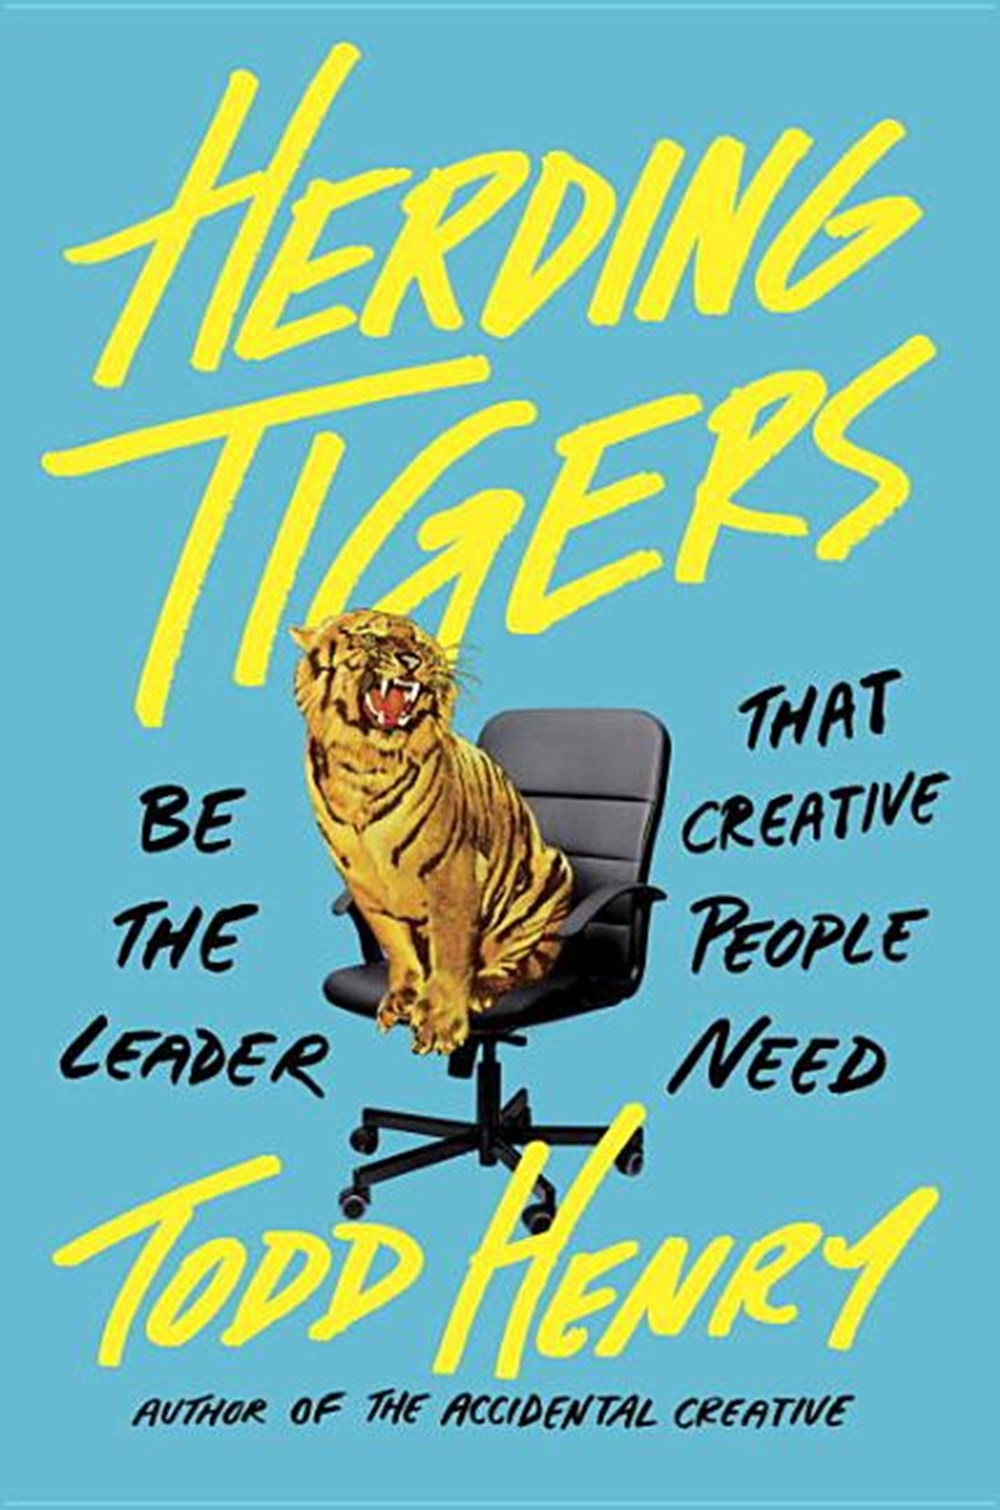 Herding Tigers Be the Leader That Creative People Need